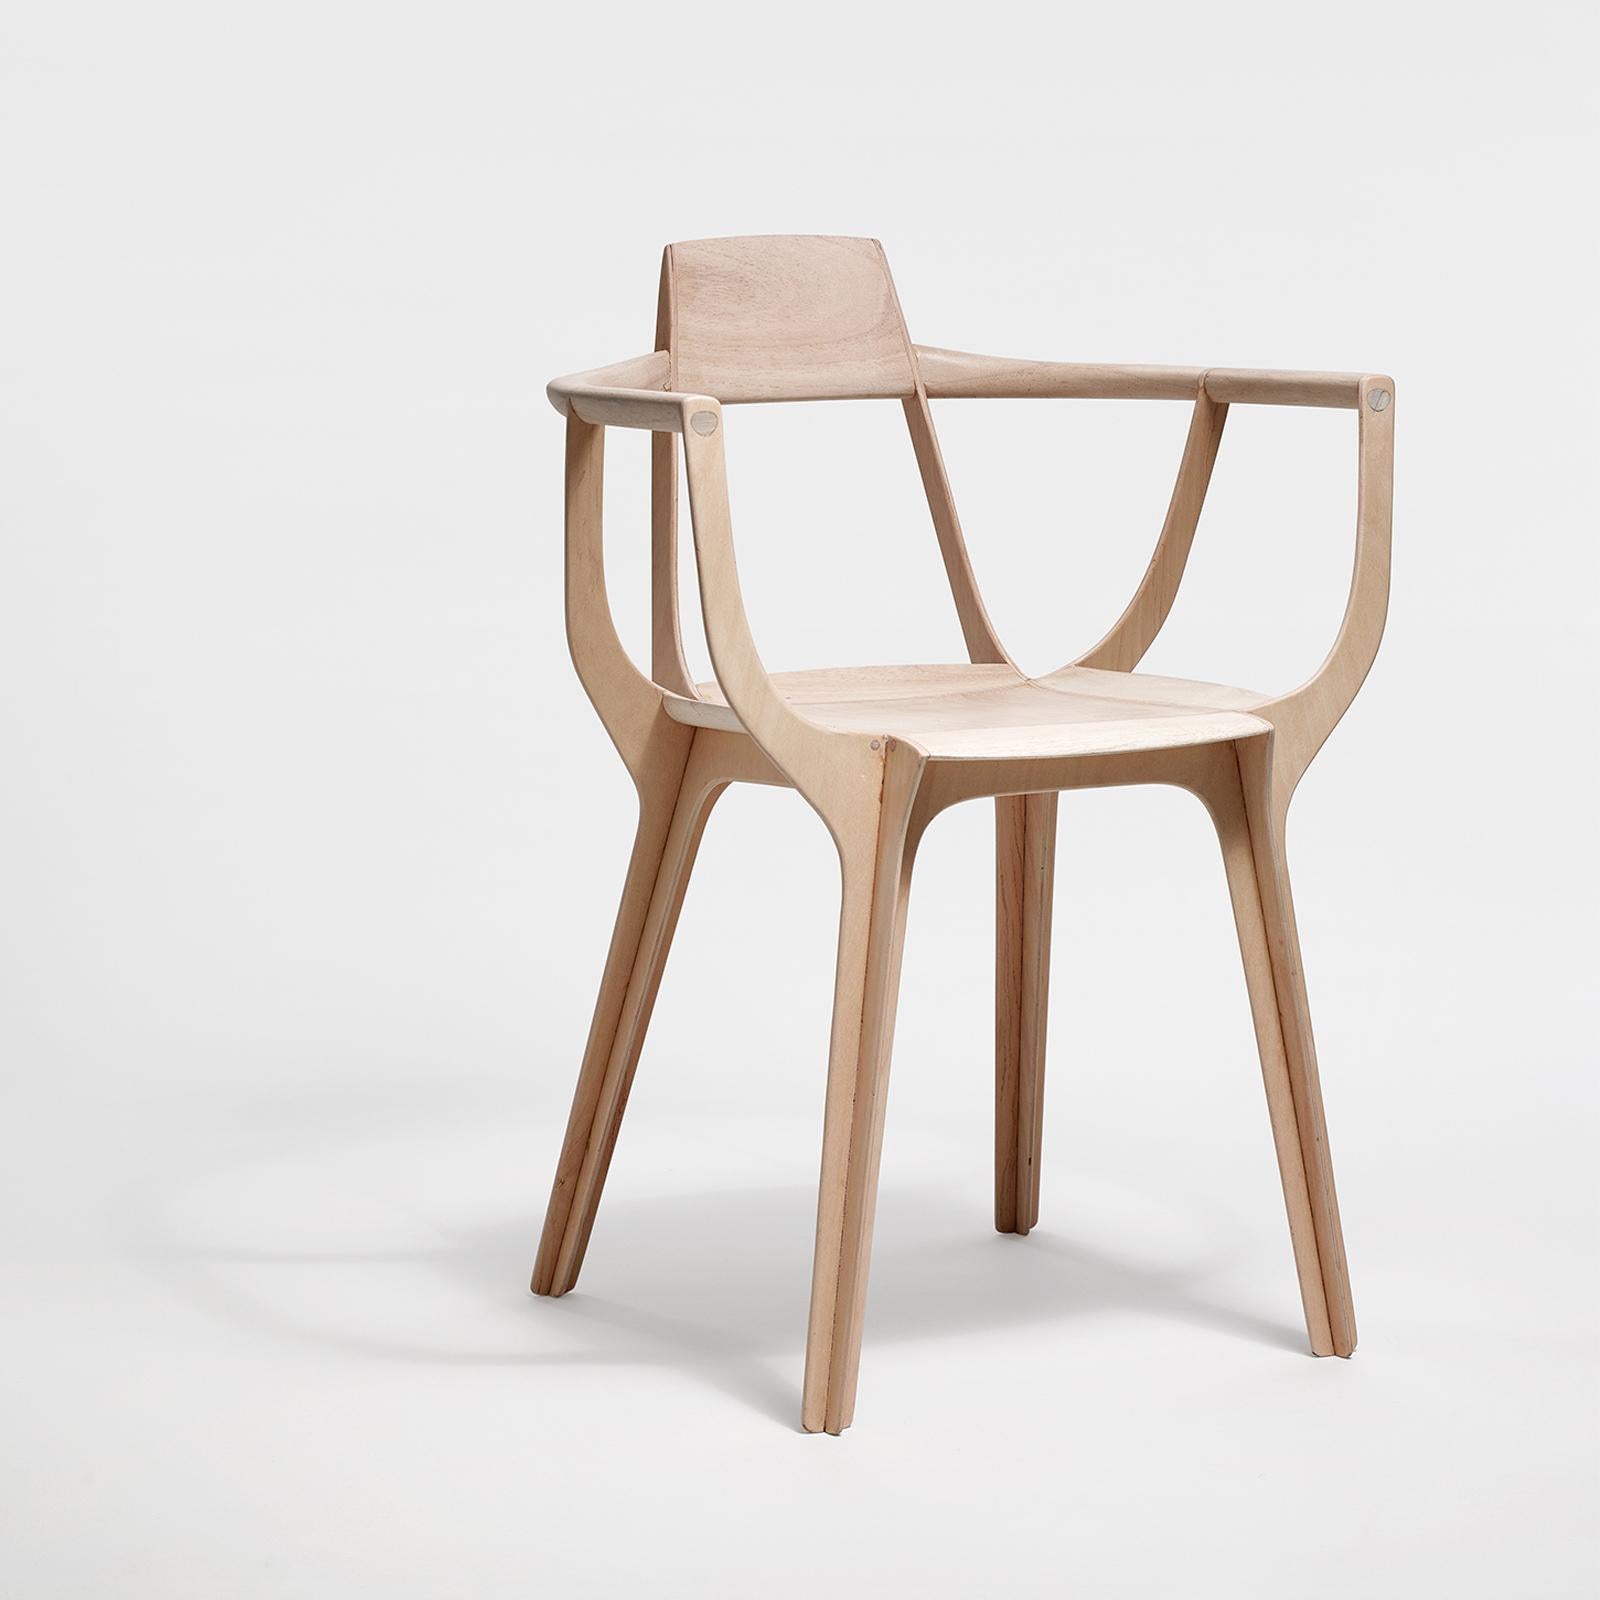 Eutopia has a sophisticated structure: this armchair is made up of four pieces of multi-laid wood that intersect and then separate again in the seat, allowing different planes to work in their own forceful directions to hold the seat and the